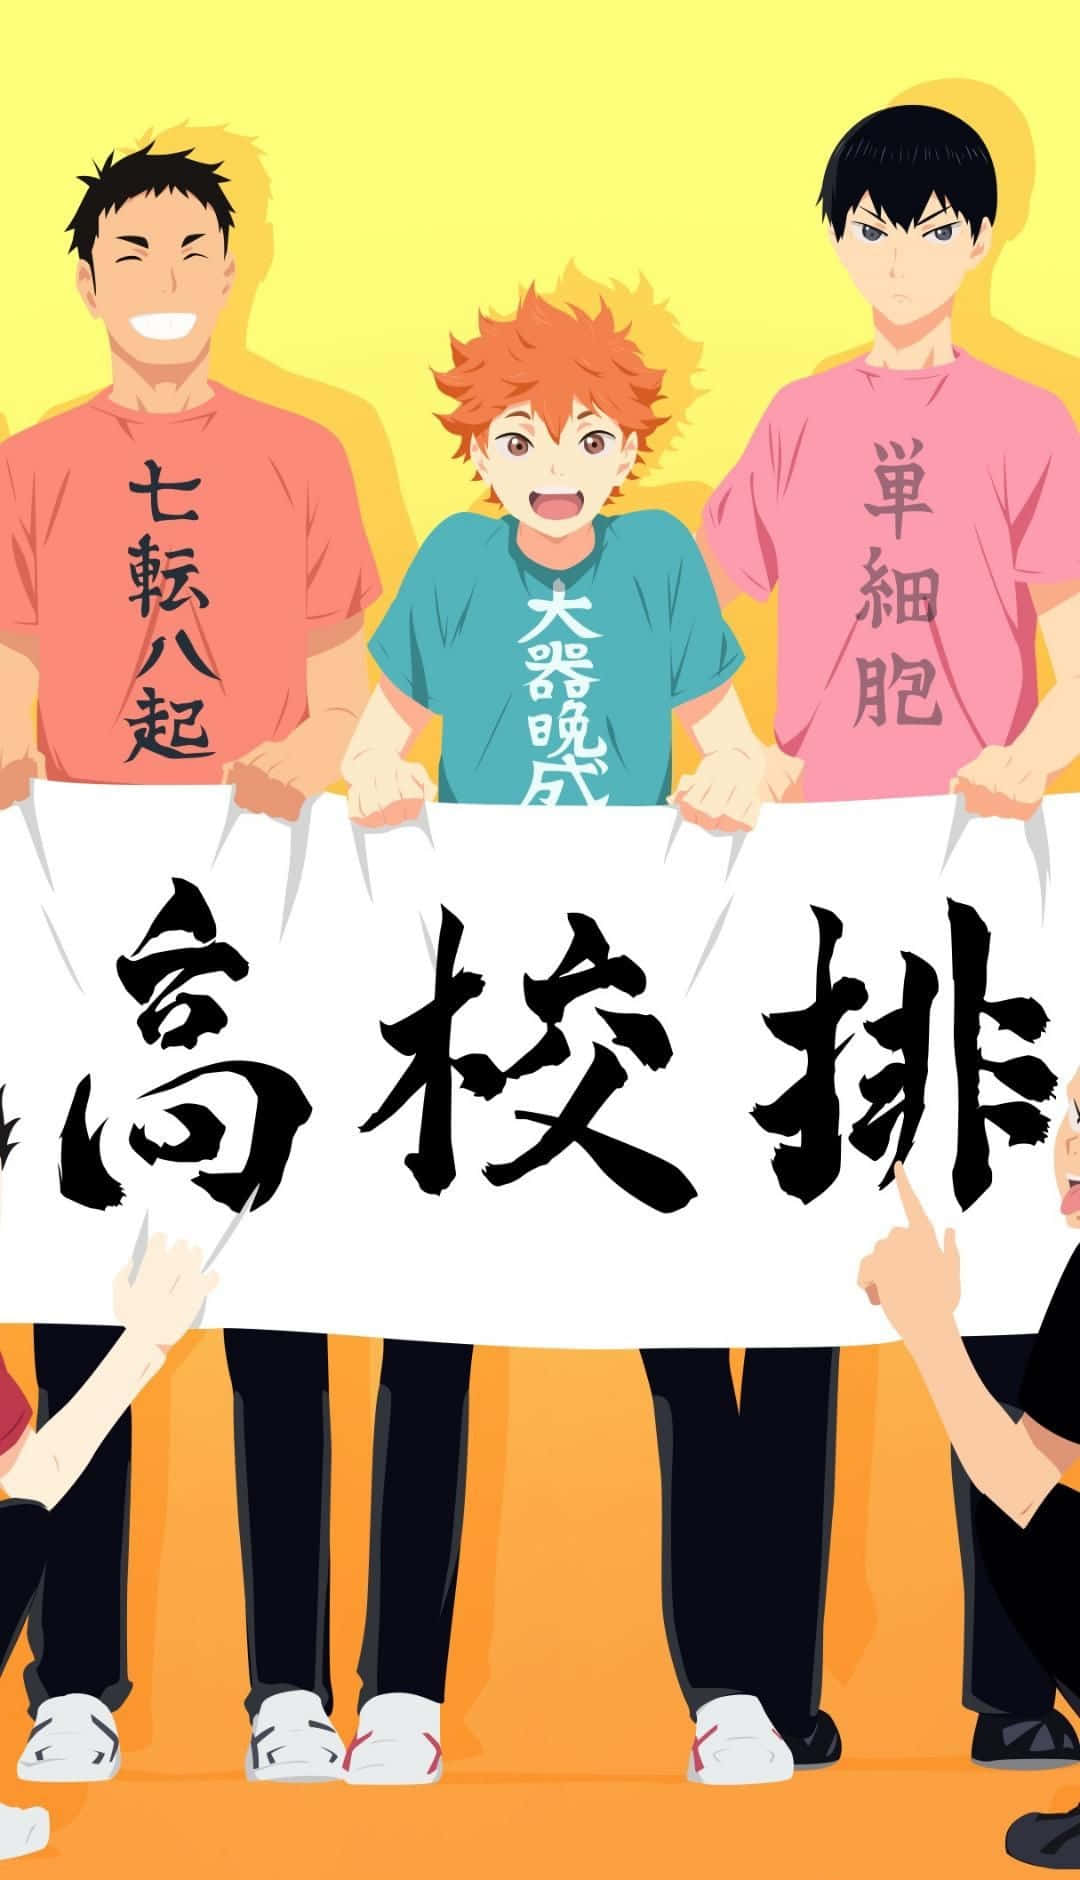 Show your pride with this clean and colourful Haikyuu design Wallpaper